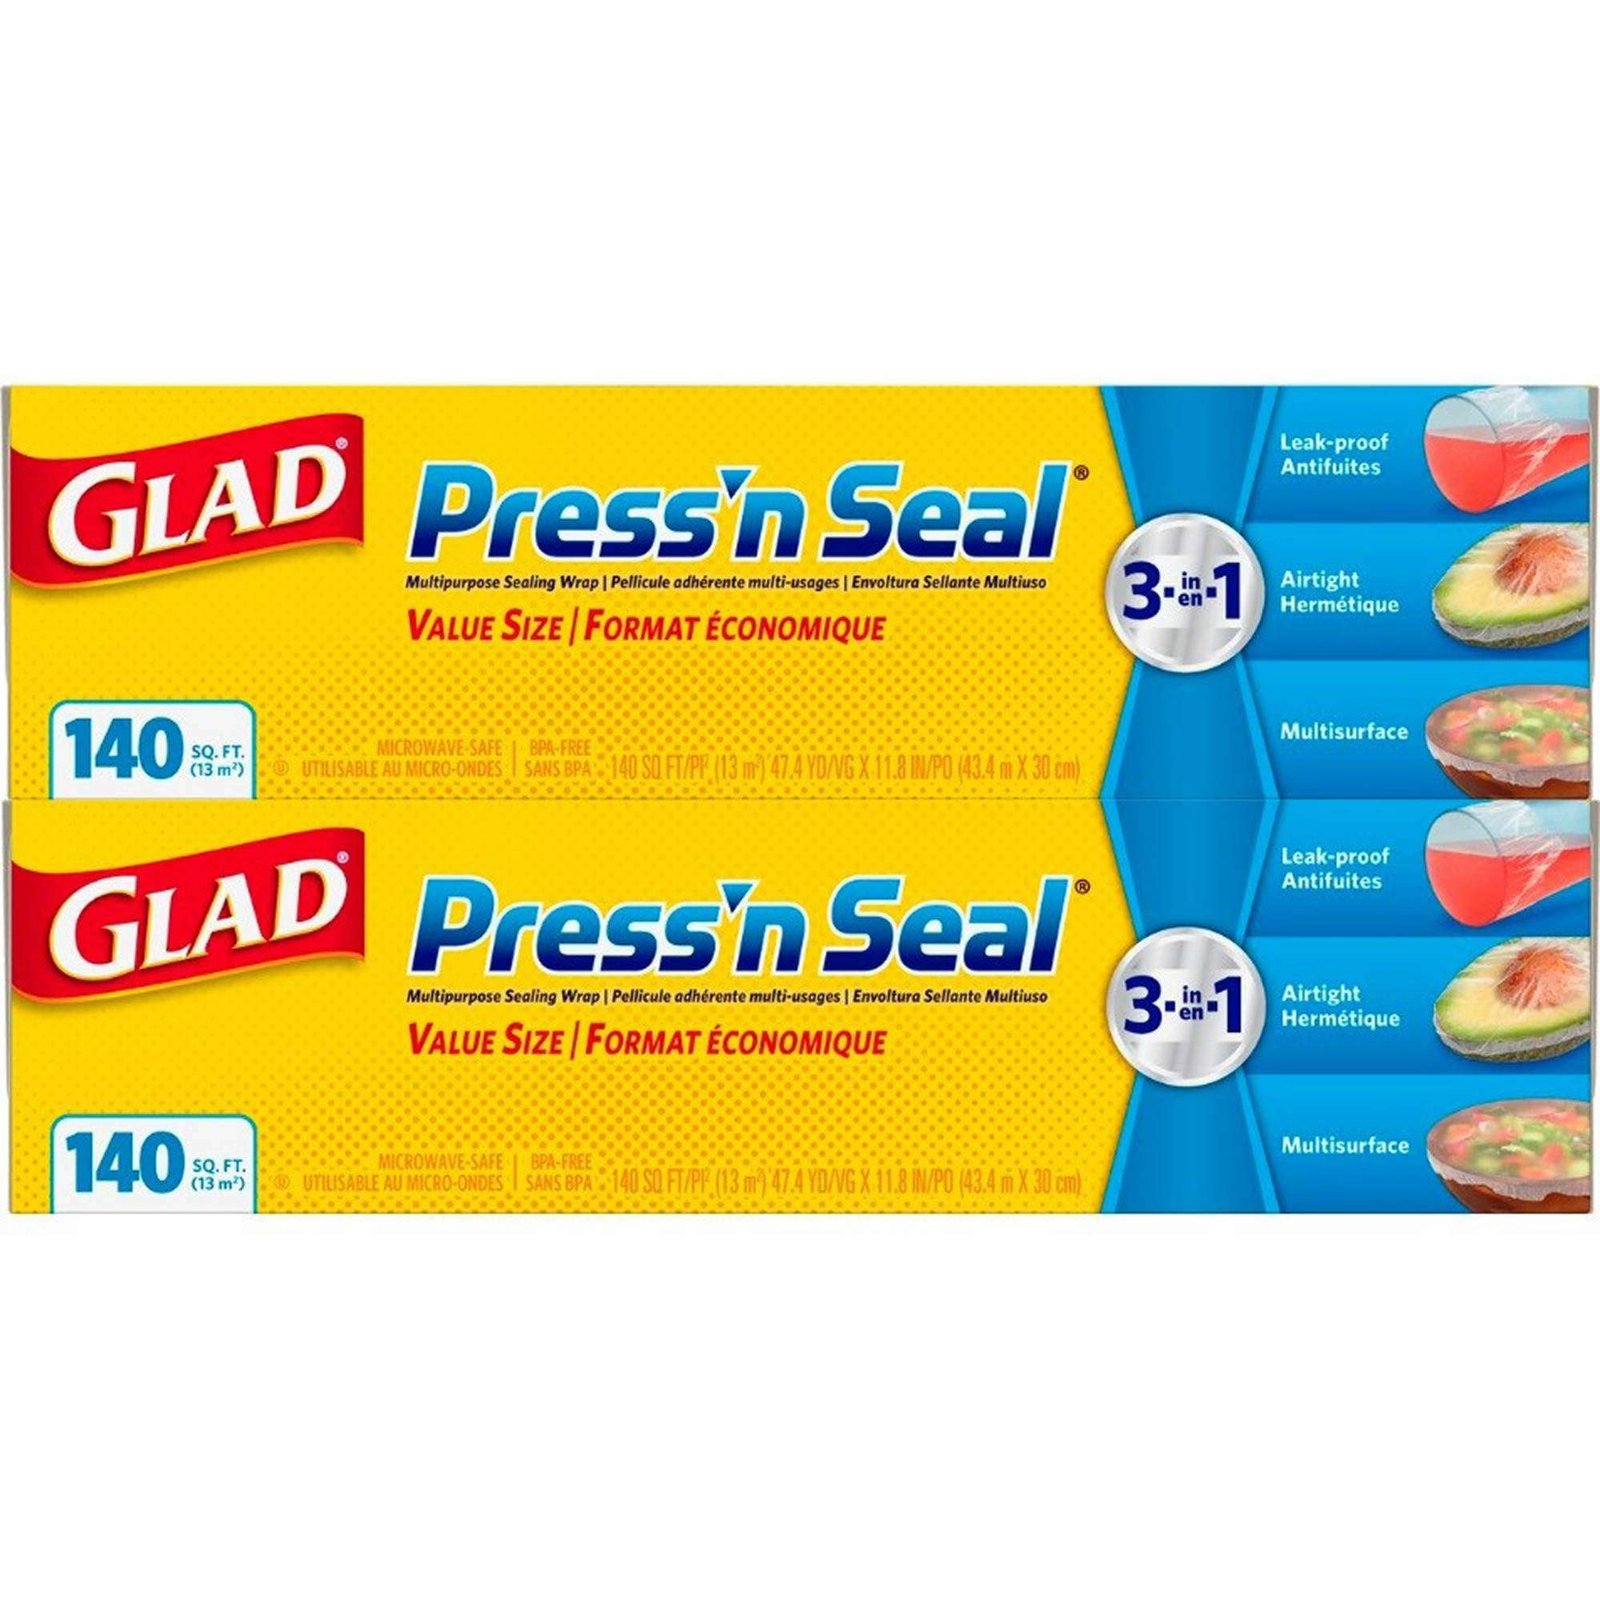 Glad Cling N Seal Plastic Food Wrap, 300 Square Foot Roll 